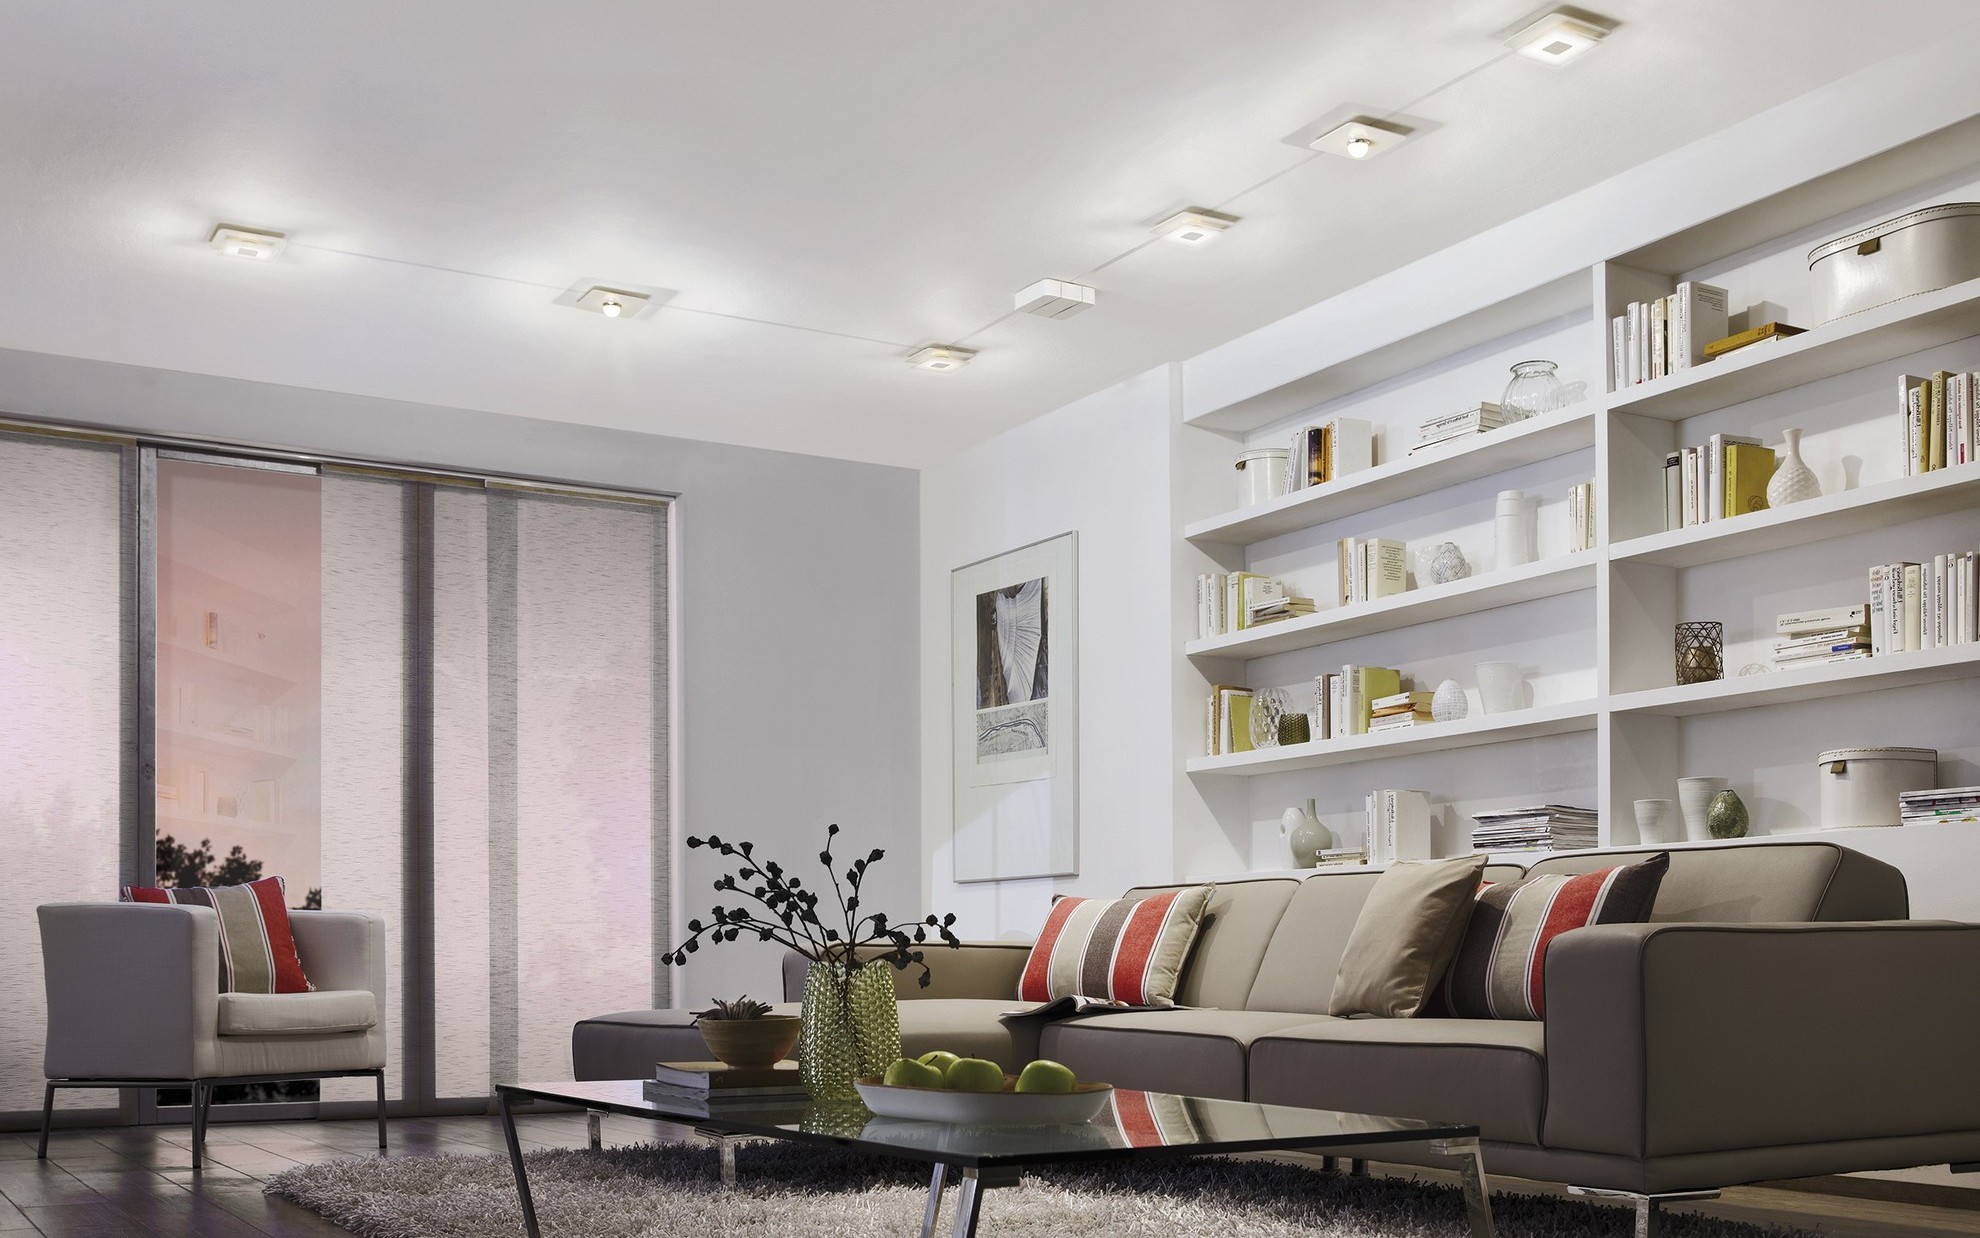 Choosing The Right Lighting For Your Home